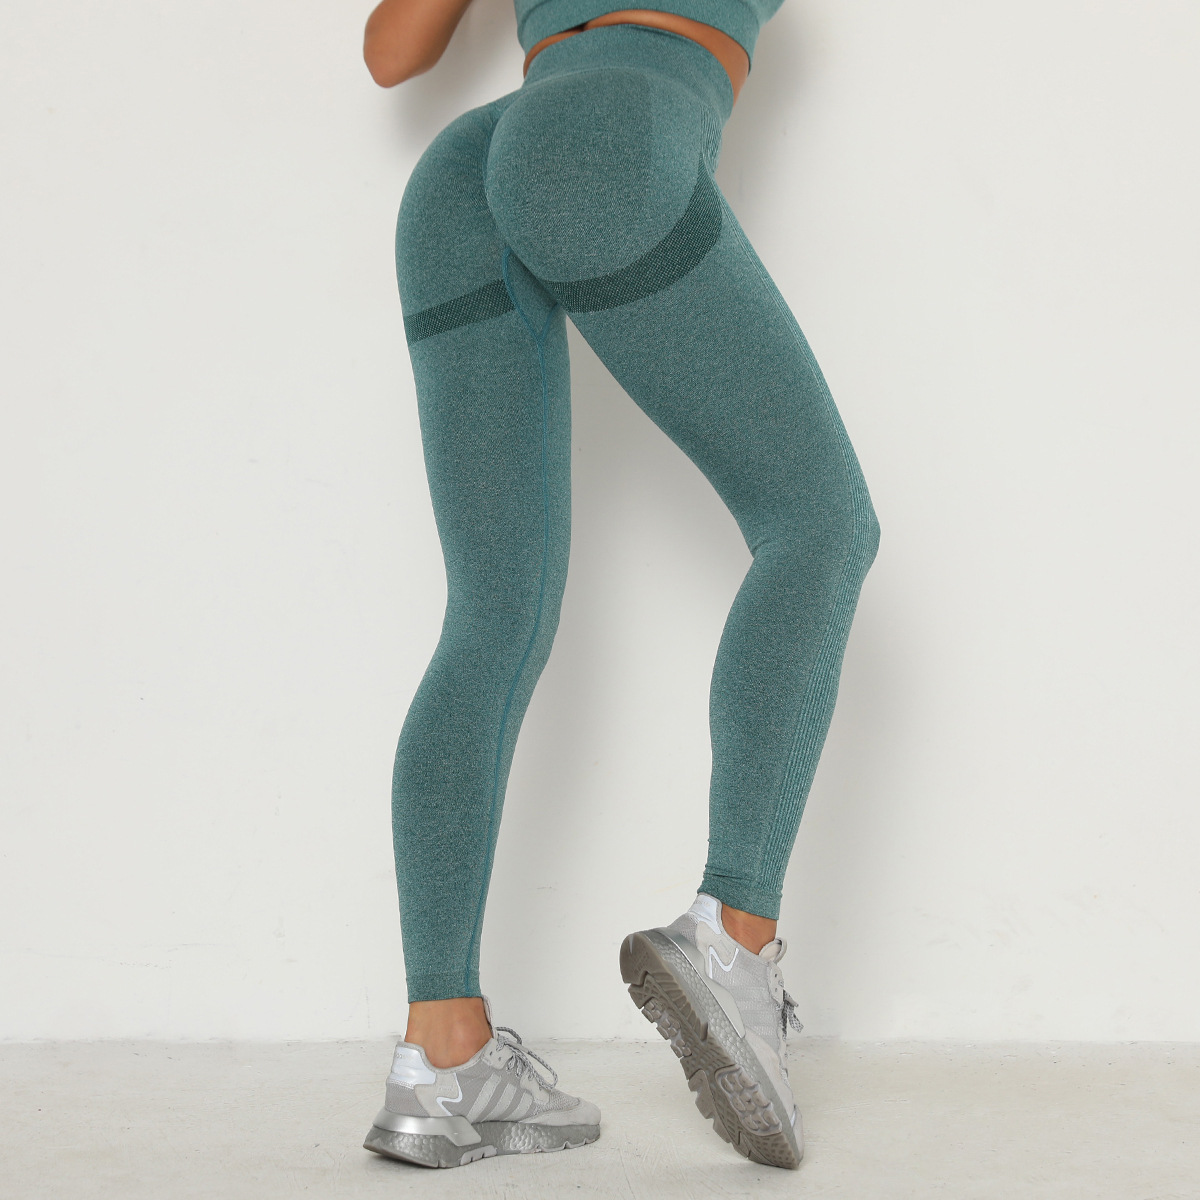 Pink High Waist Seamless Yoga Leggings For Women Sexy Booty Workout Gym Tiktok  Tights And Sports Legging H1221 From Mengyang10, $14.65